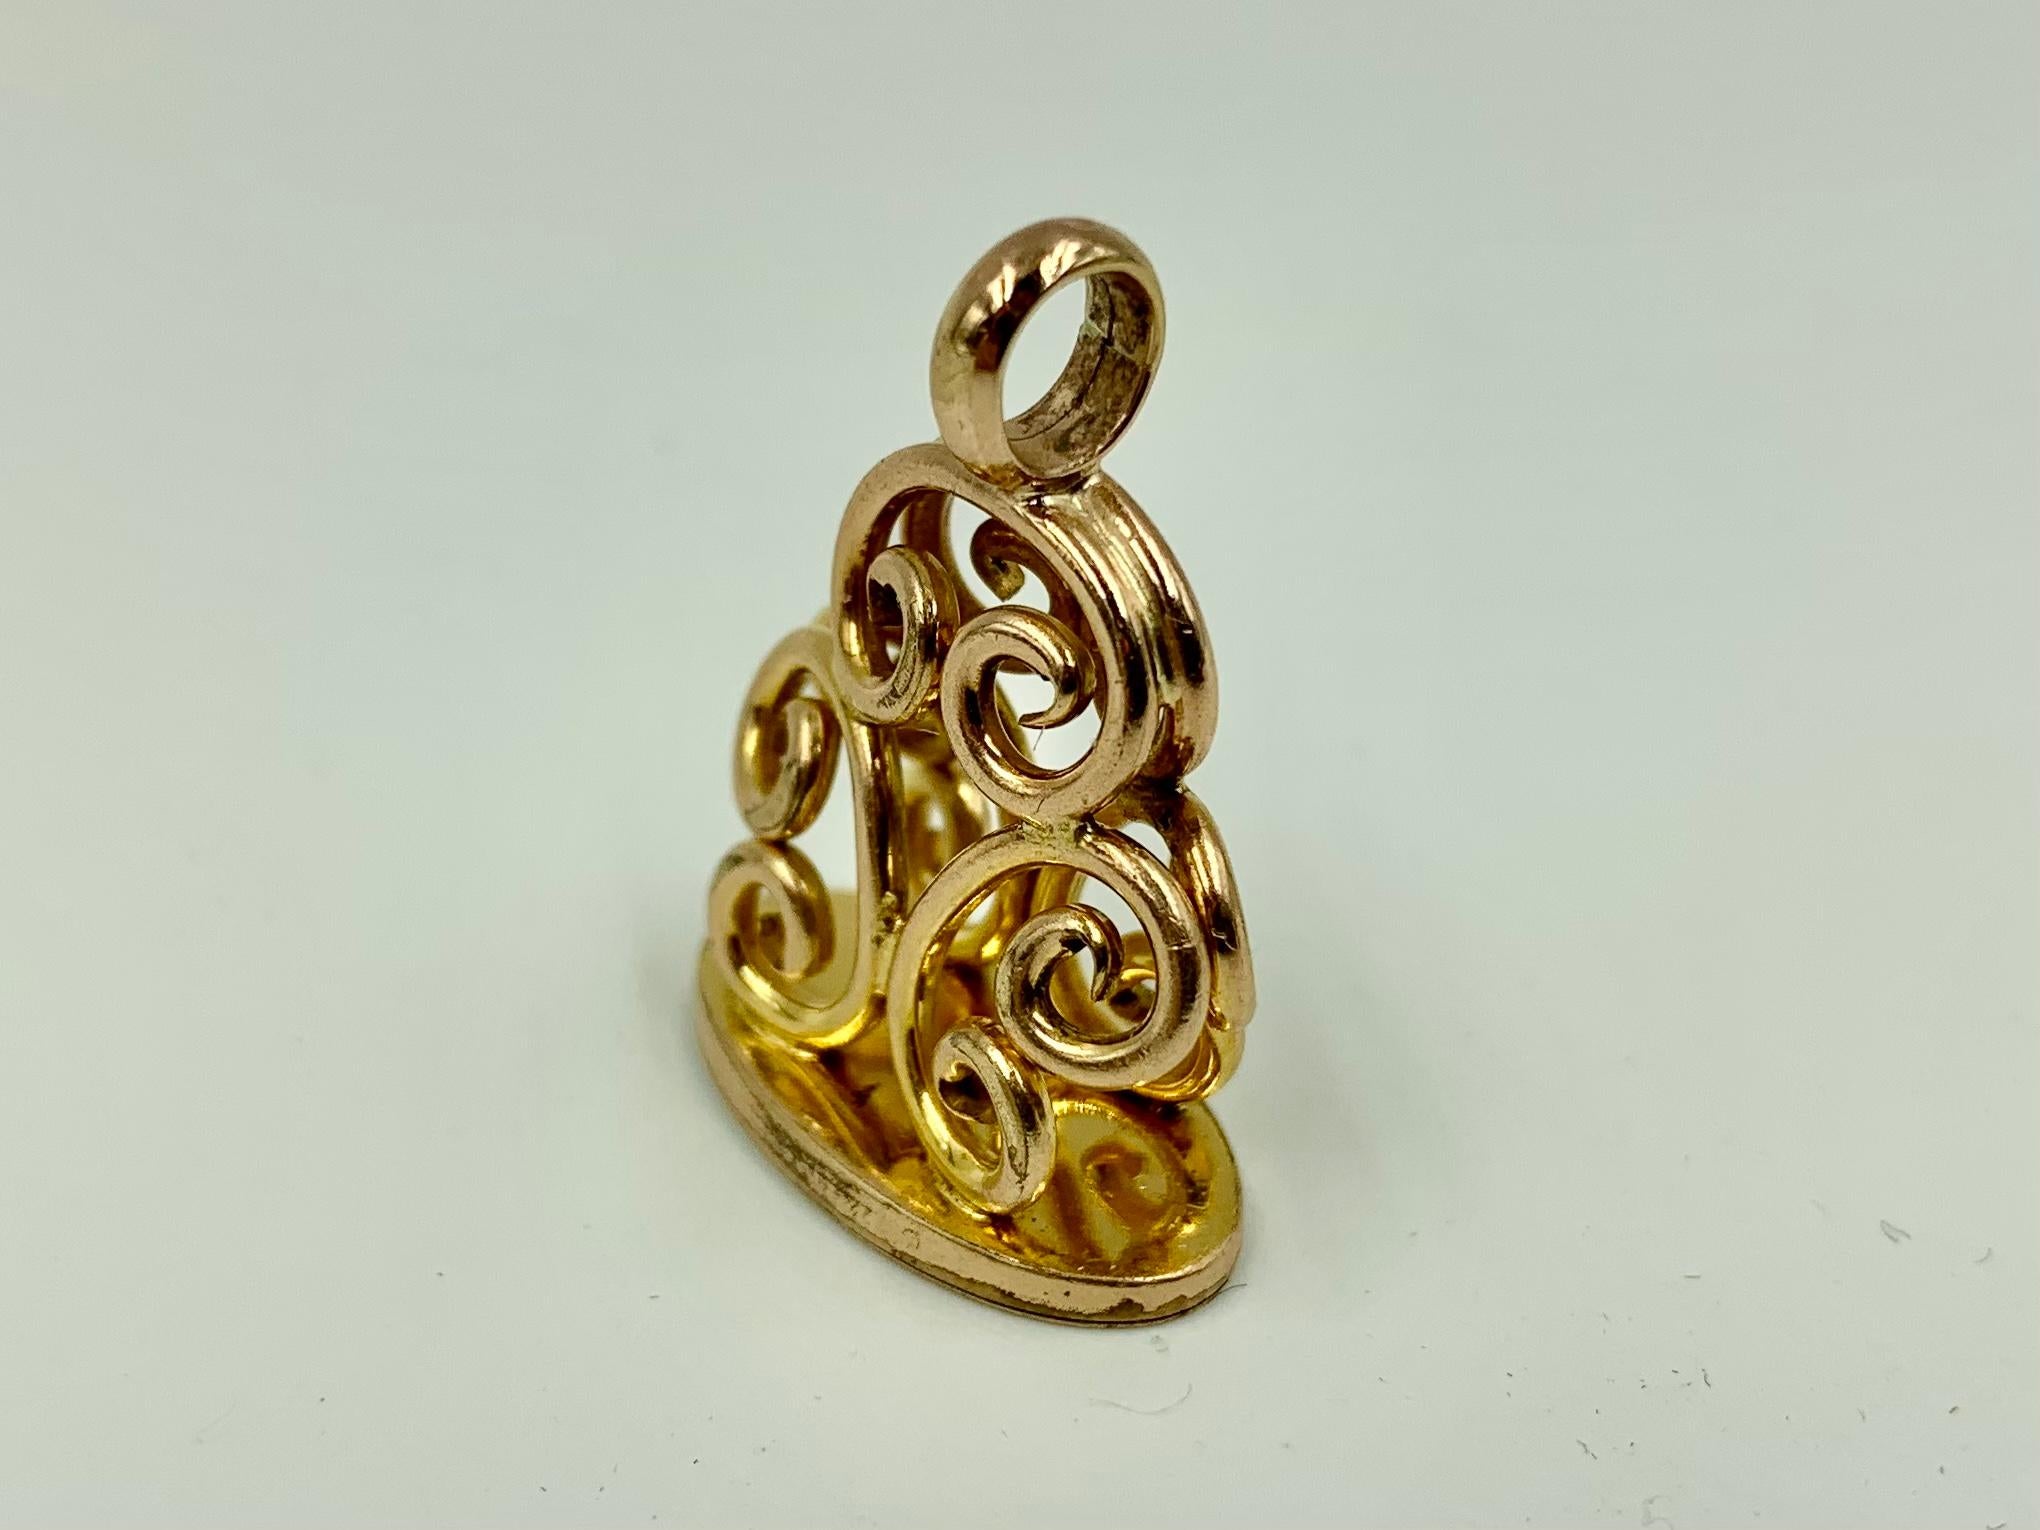 Antique Edwardian 14K Yellow Gold Scroll Motif Signet Seal Pendant, 19th Century In Good Condition For Sale In New York, NY